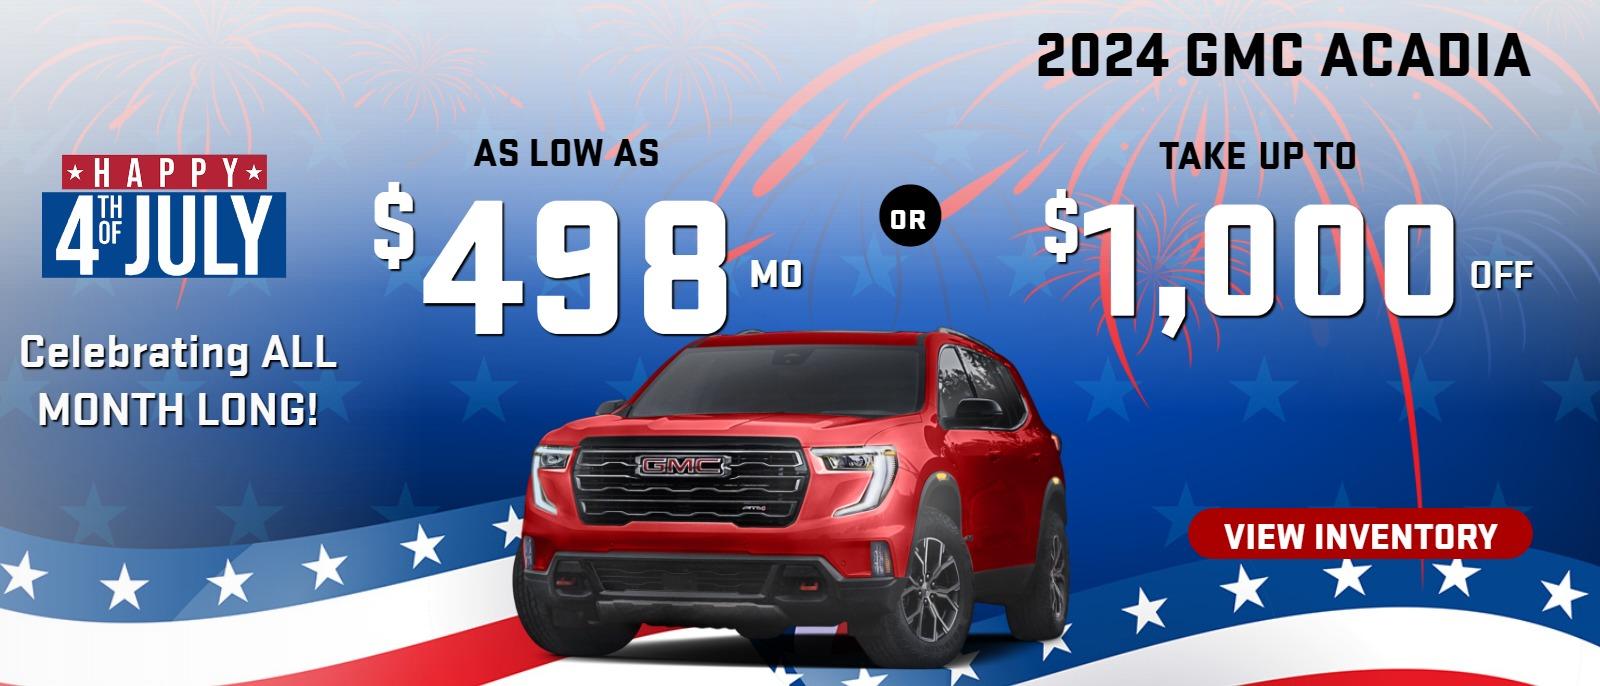 2024 GMC Acadia
Stock G4852

Take up to 
$1000 OFF        
OR 
AS LOW AS
$498/mo